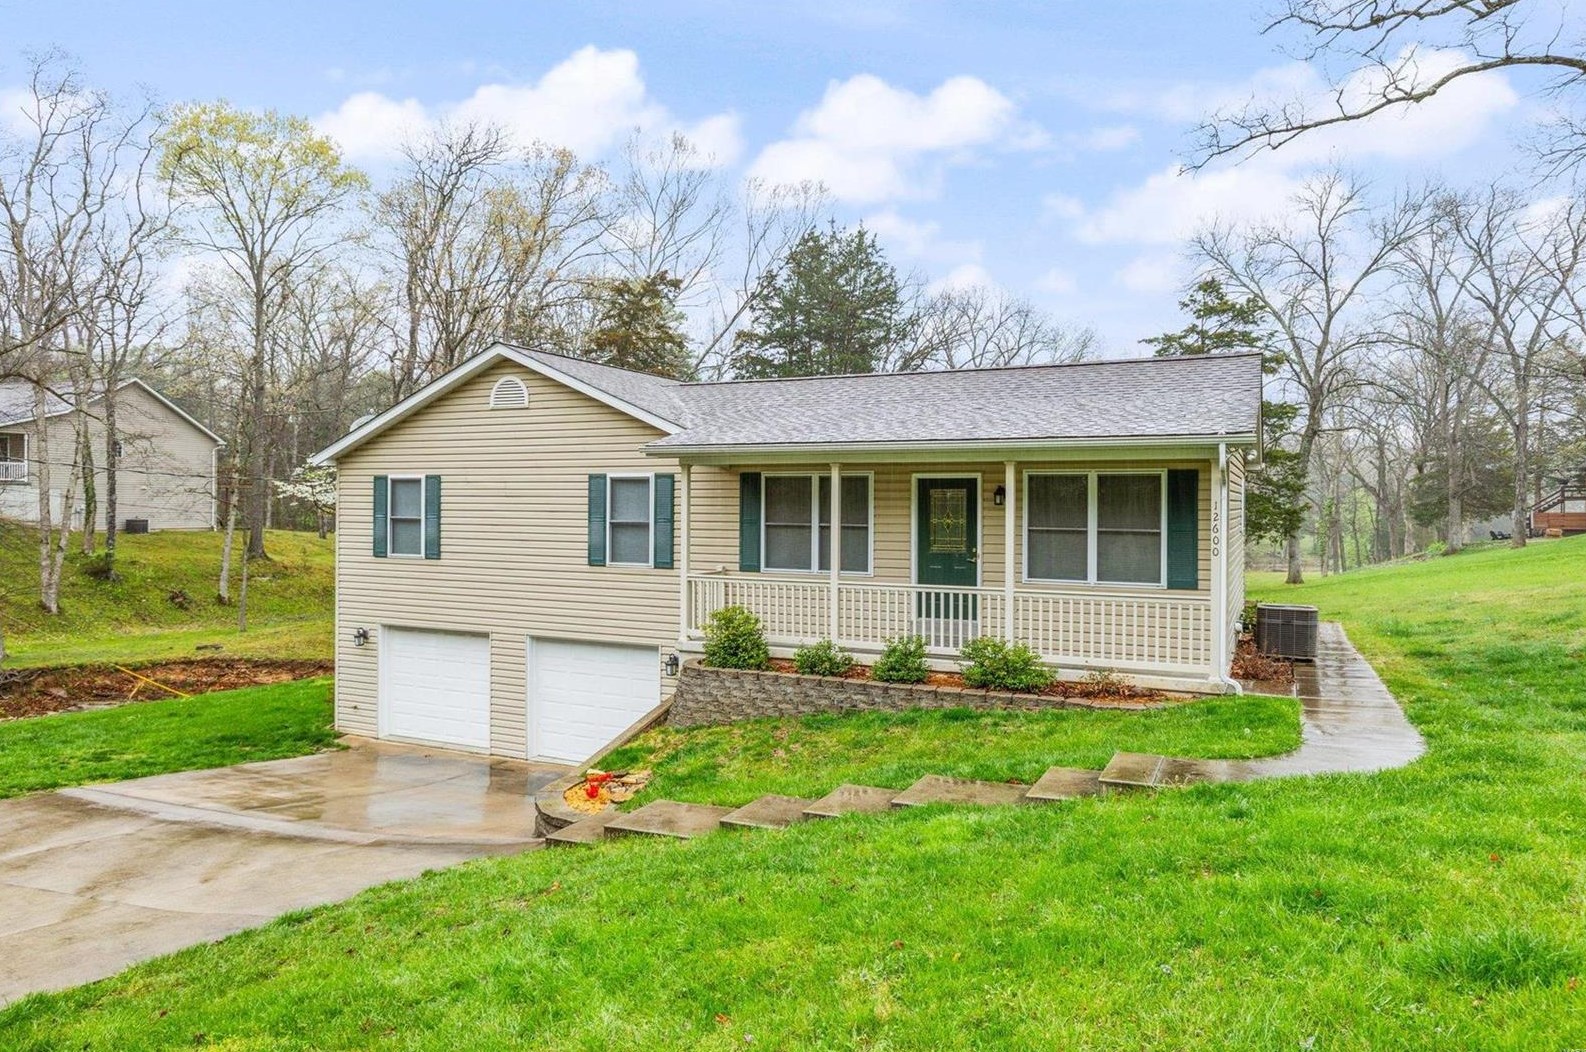 12600 Tall Pine Dr, New Offenburg, MO 63670